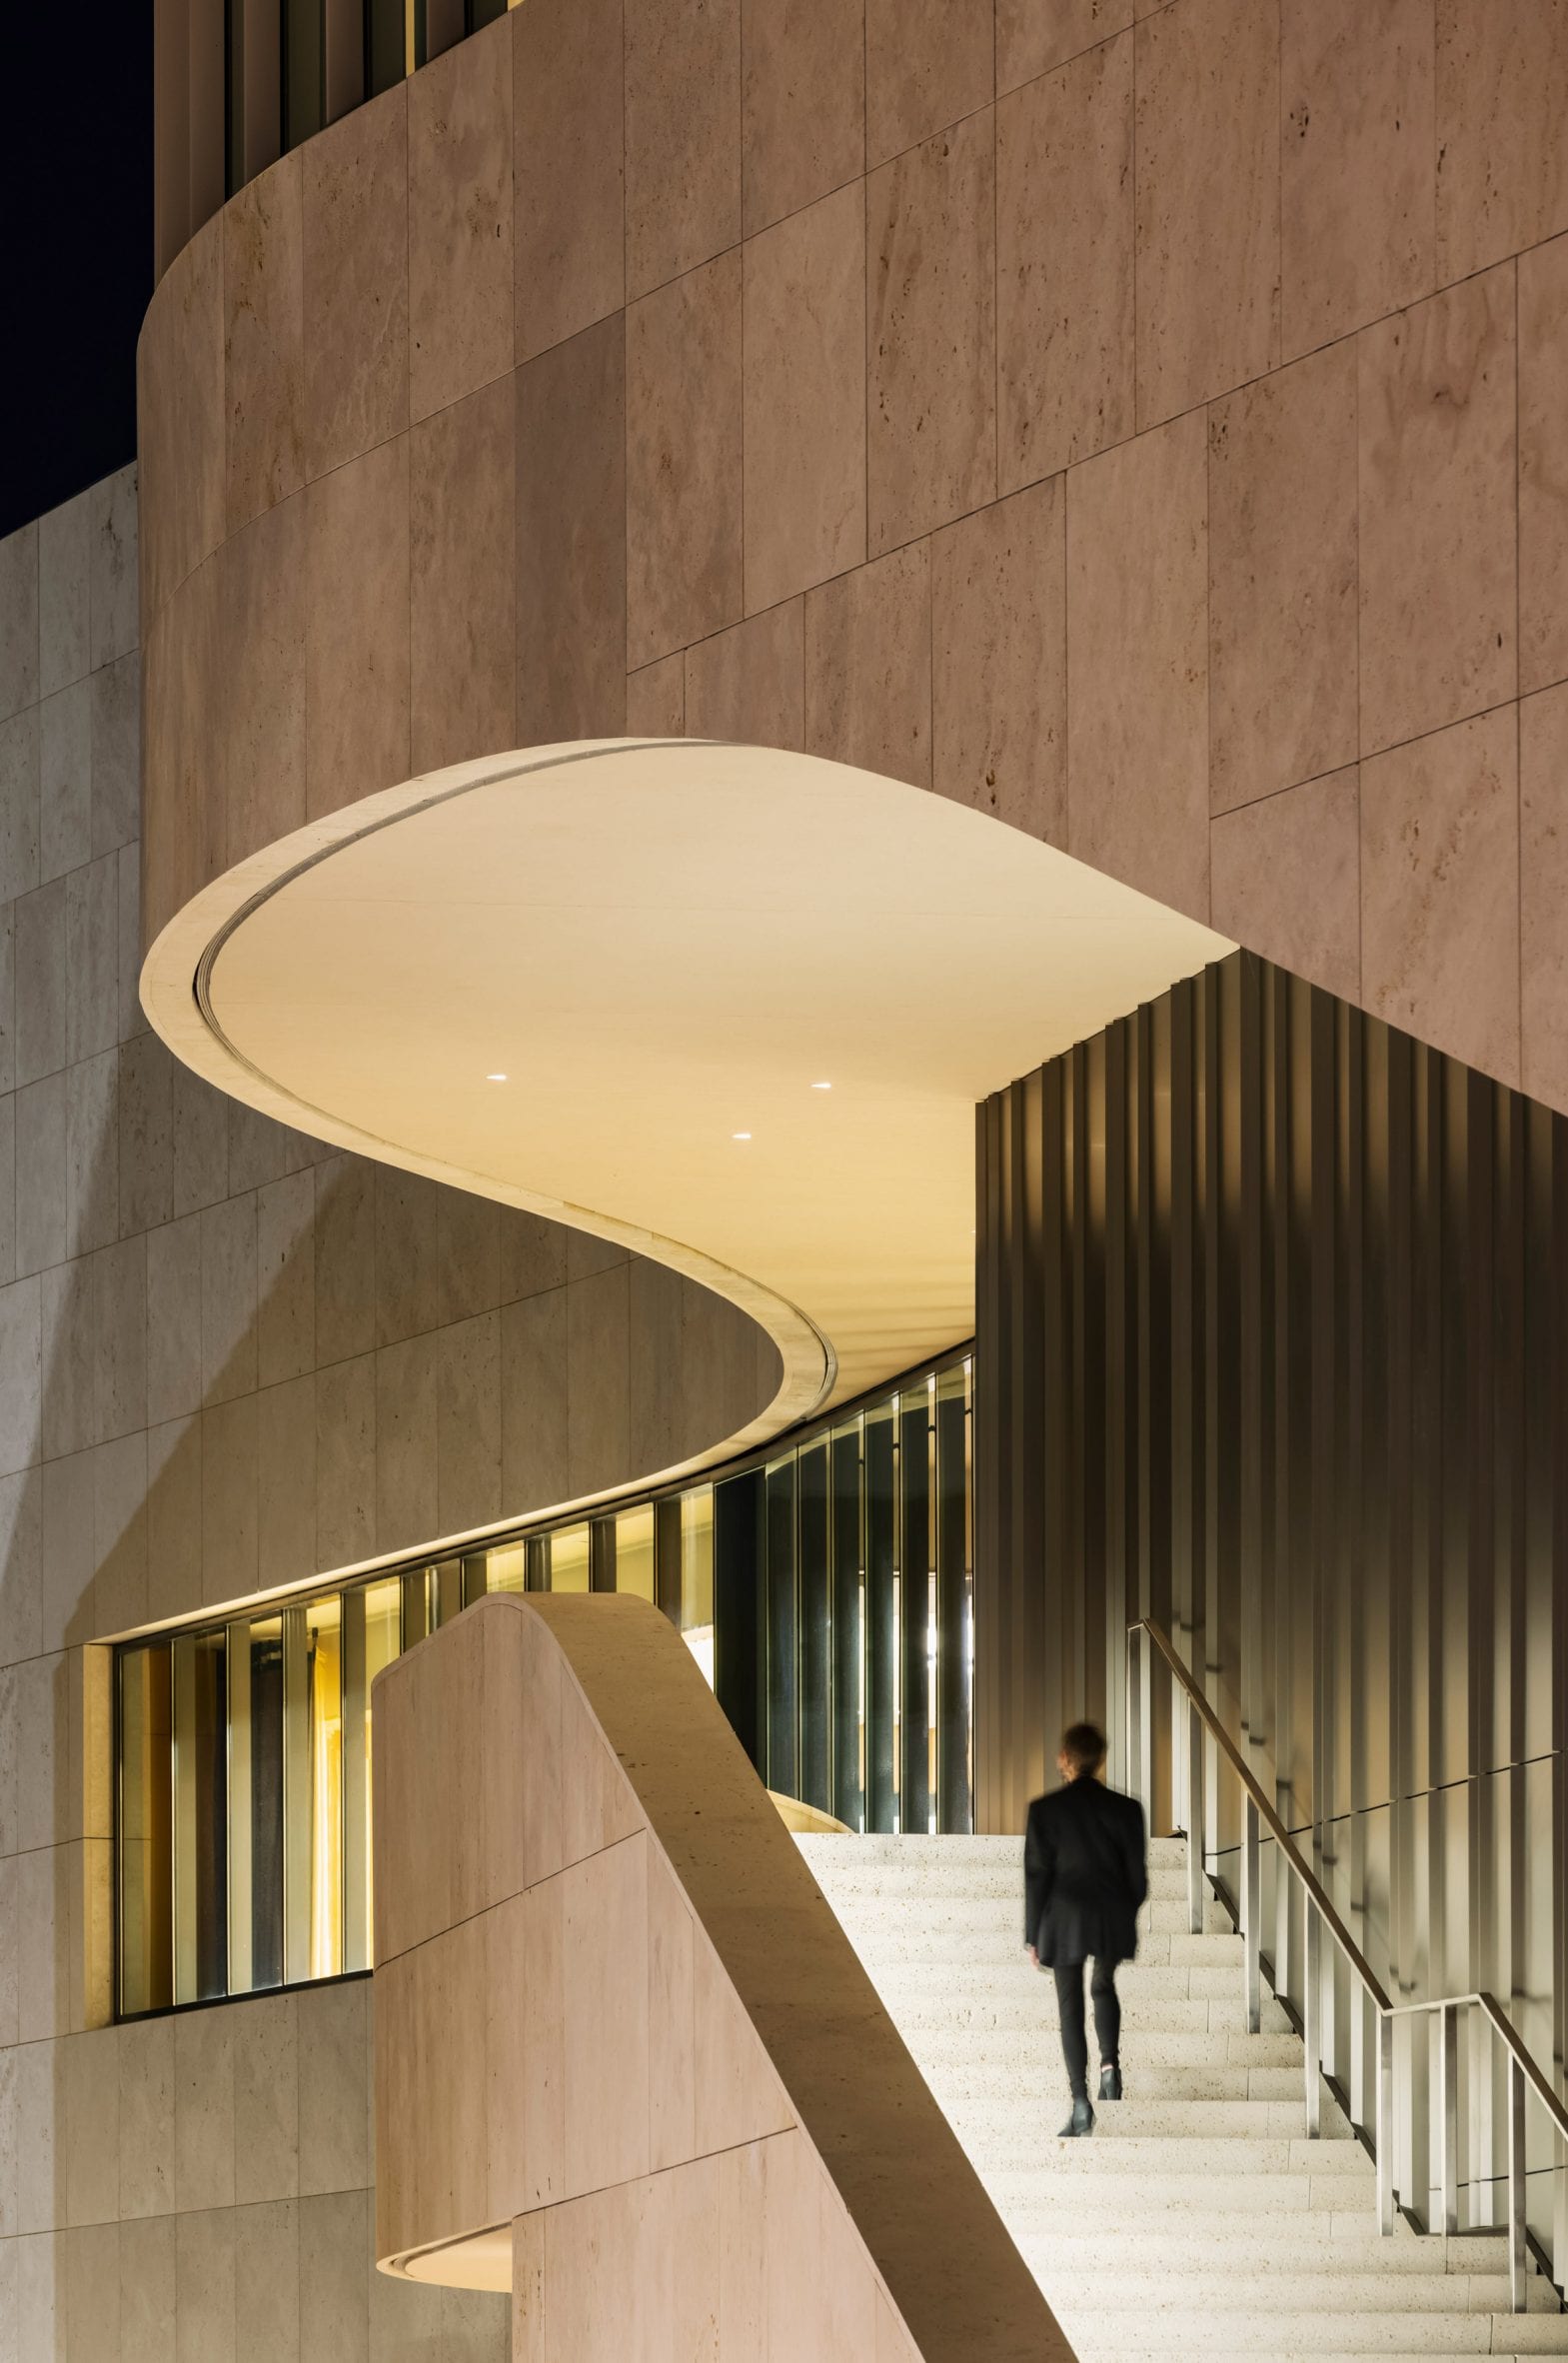 Grand staircase on the exterior of the museum by Weiss/Manfredi